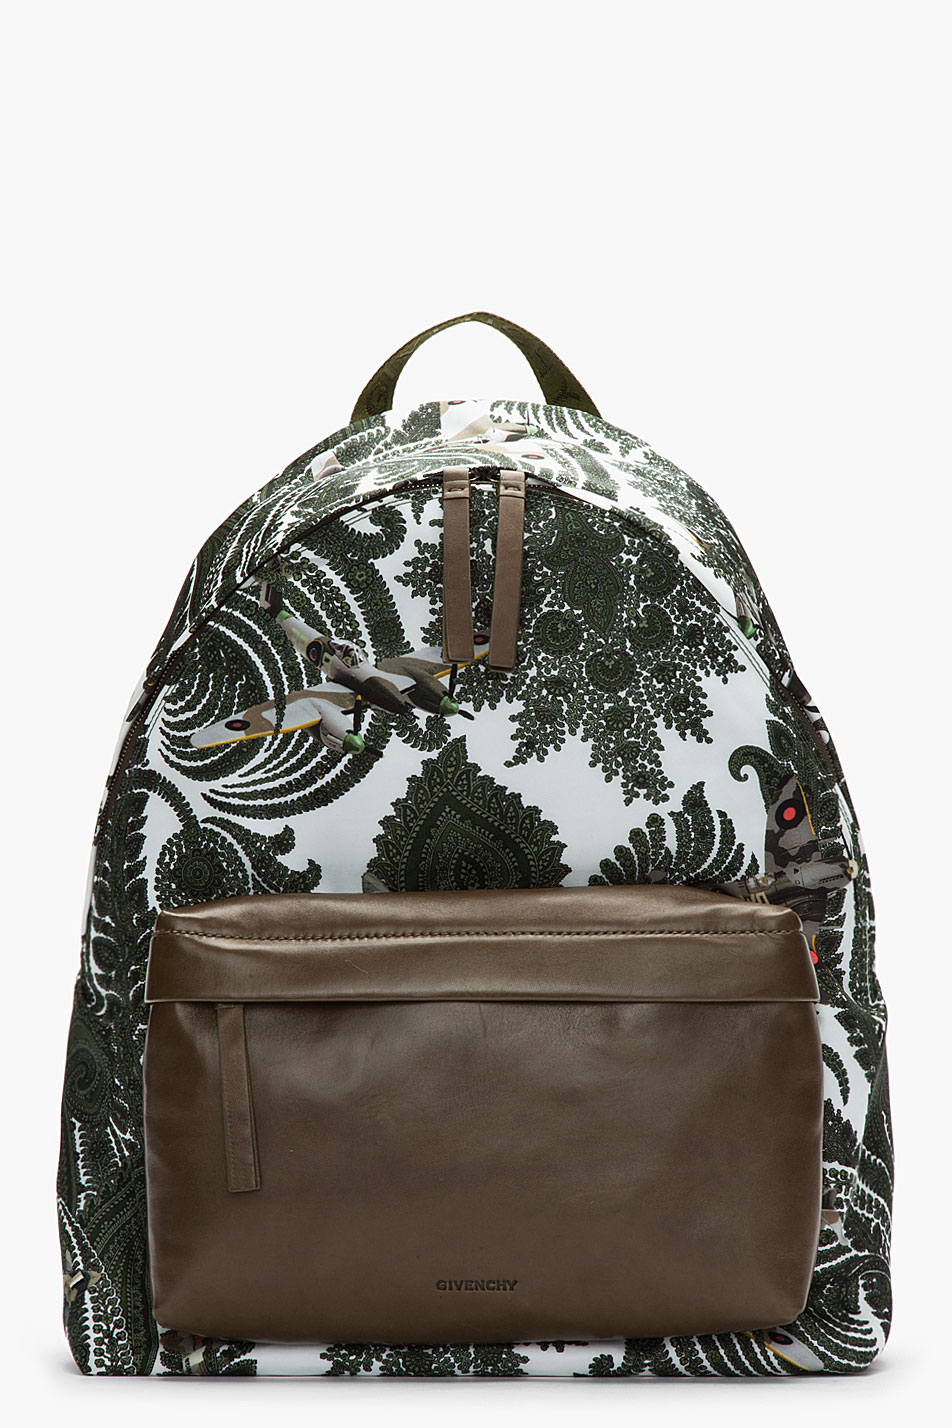 Paisley Print Olive Green Leather Trimmed Backpack Givenchy